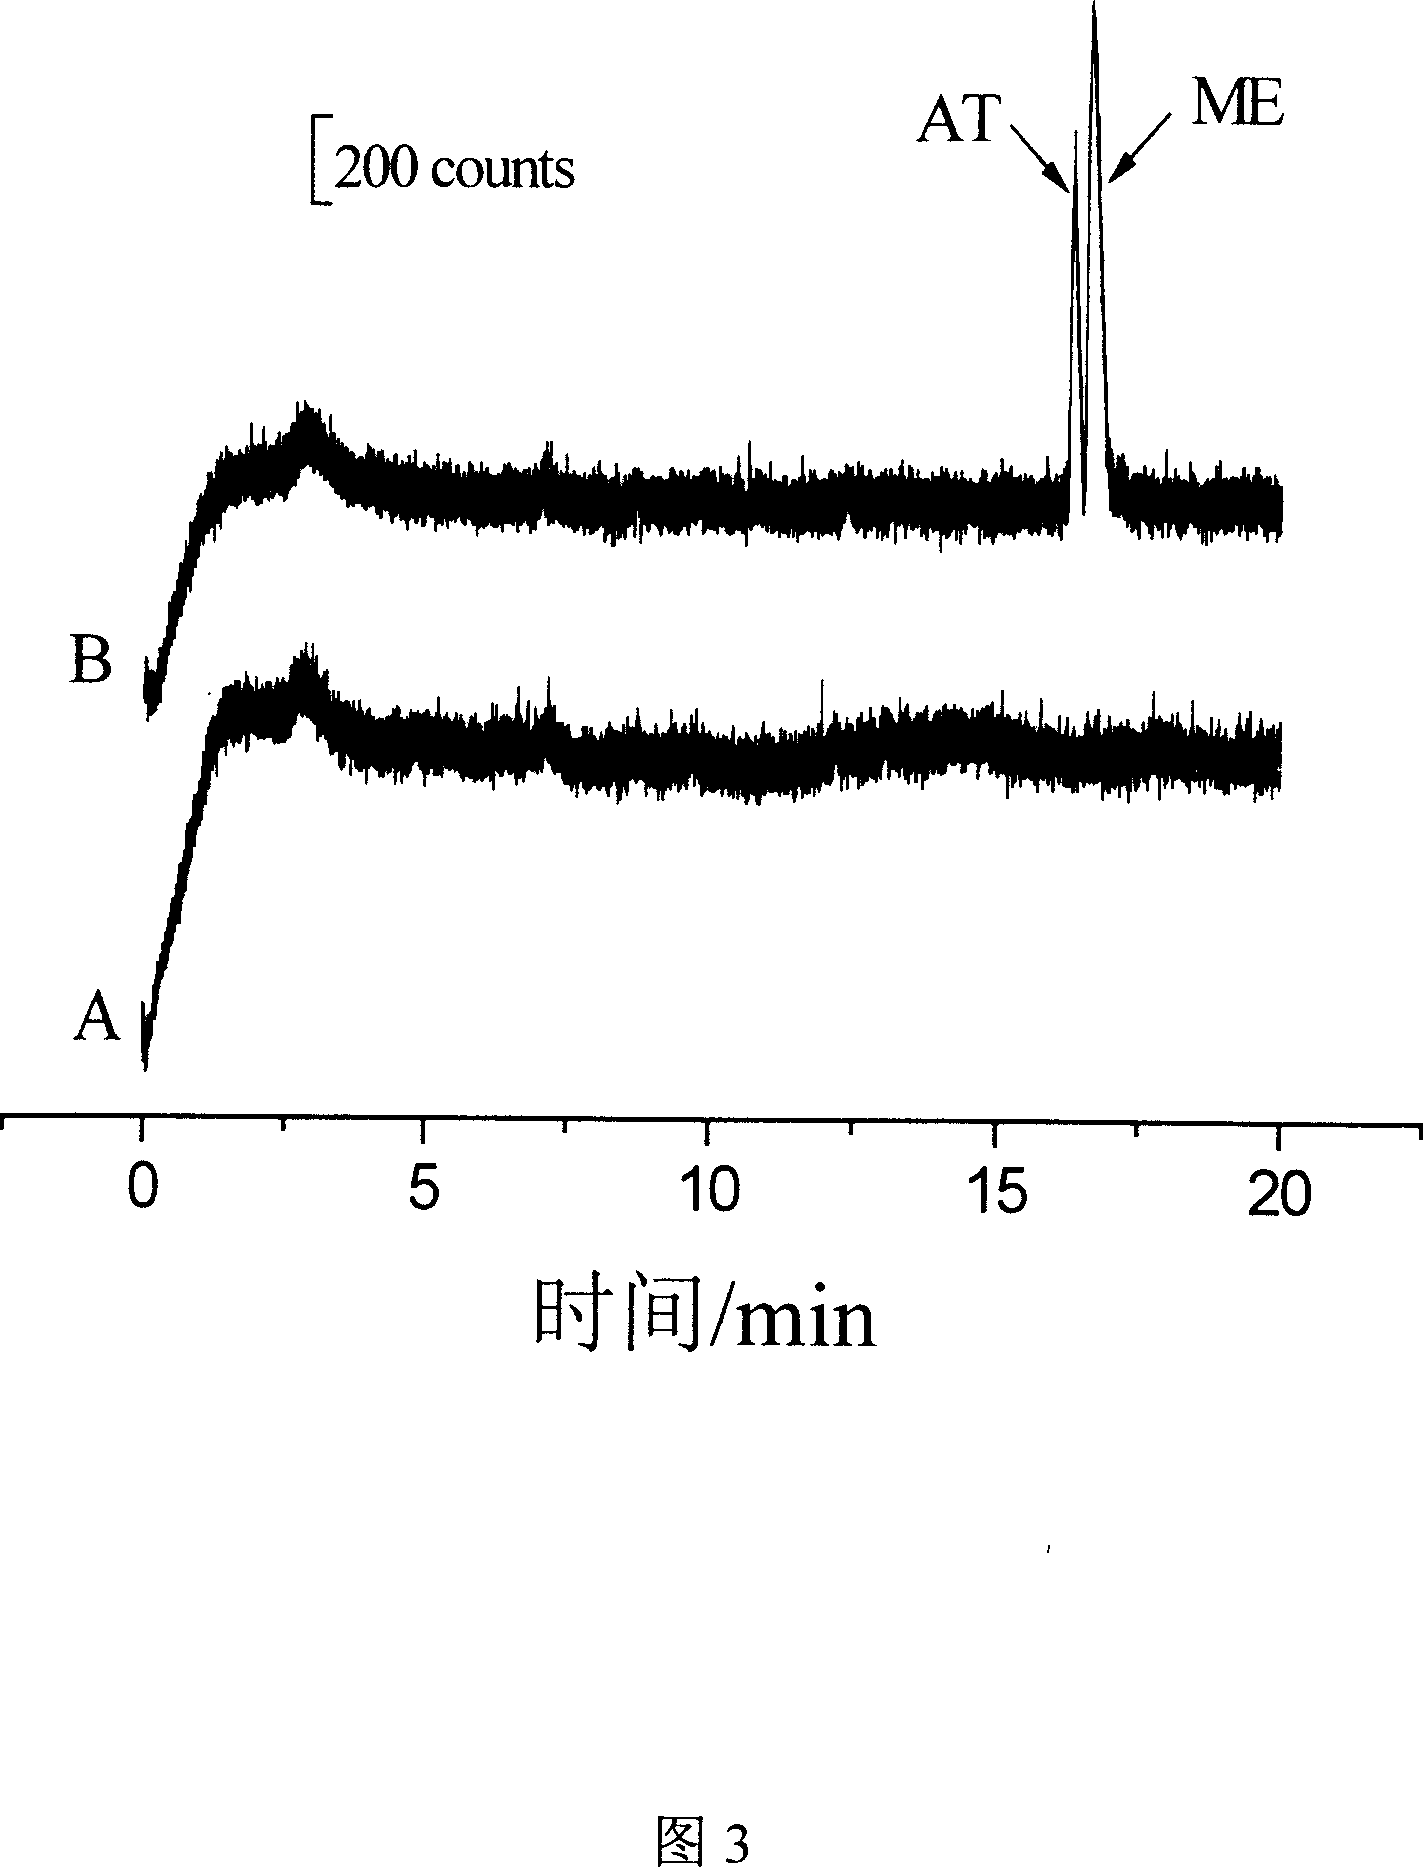 Method for capillary electrophoresis electrochemiluminescence detection of metoprolol and atenolol